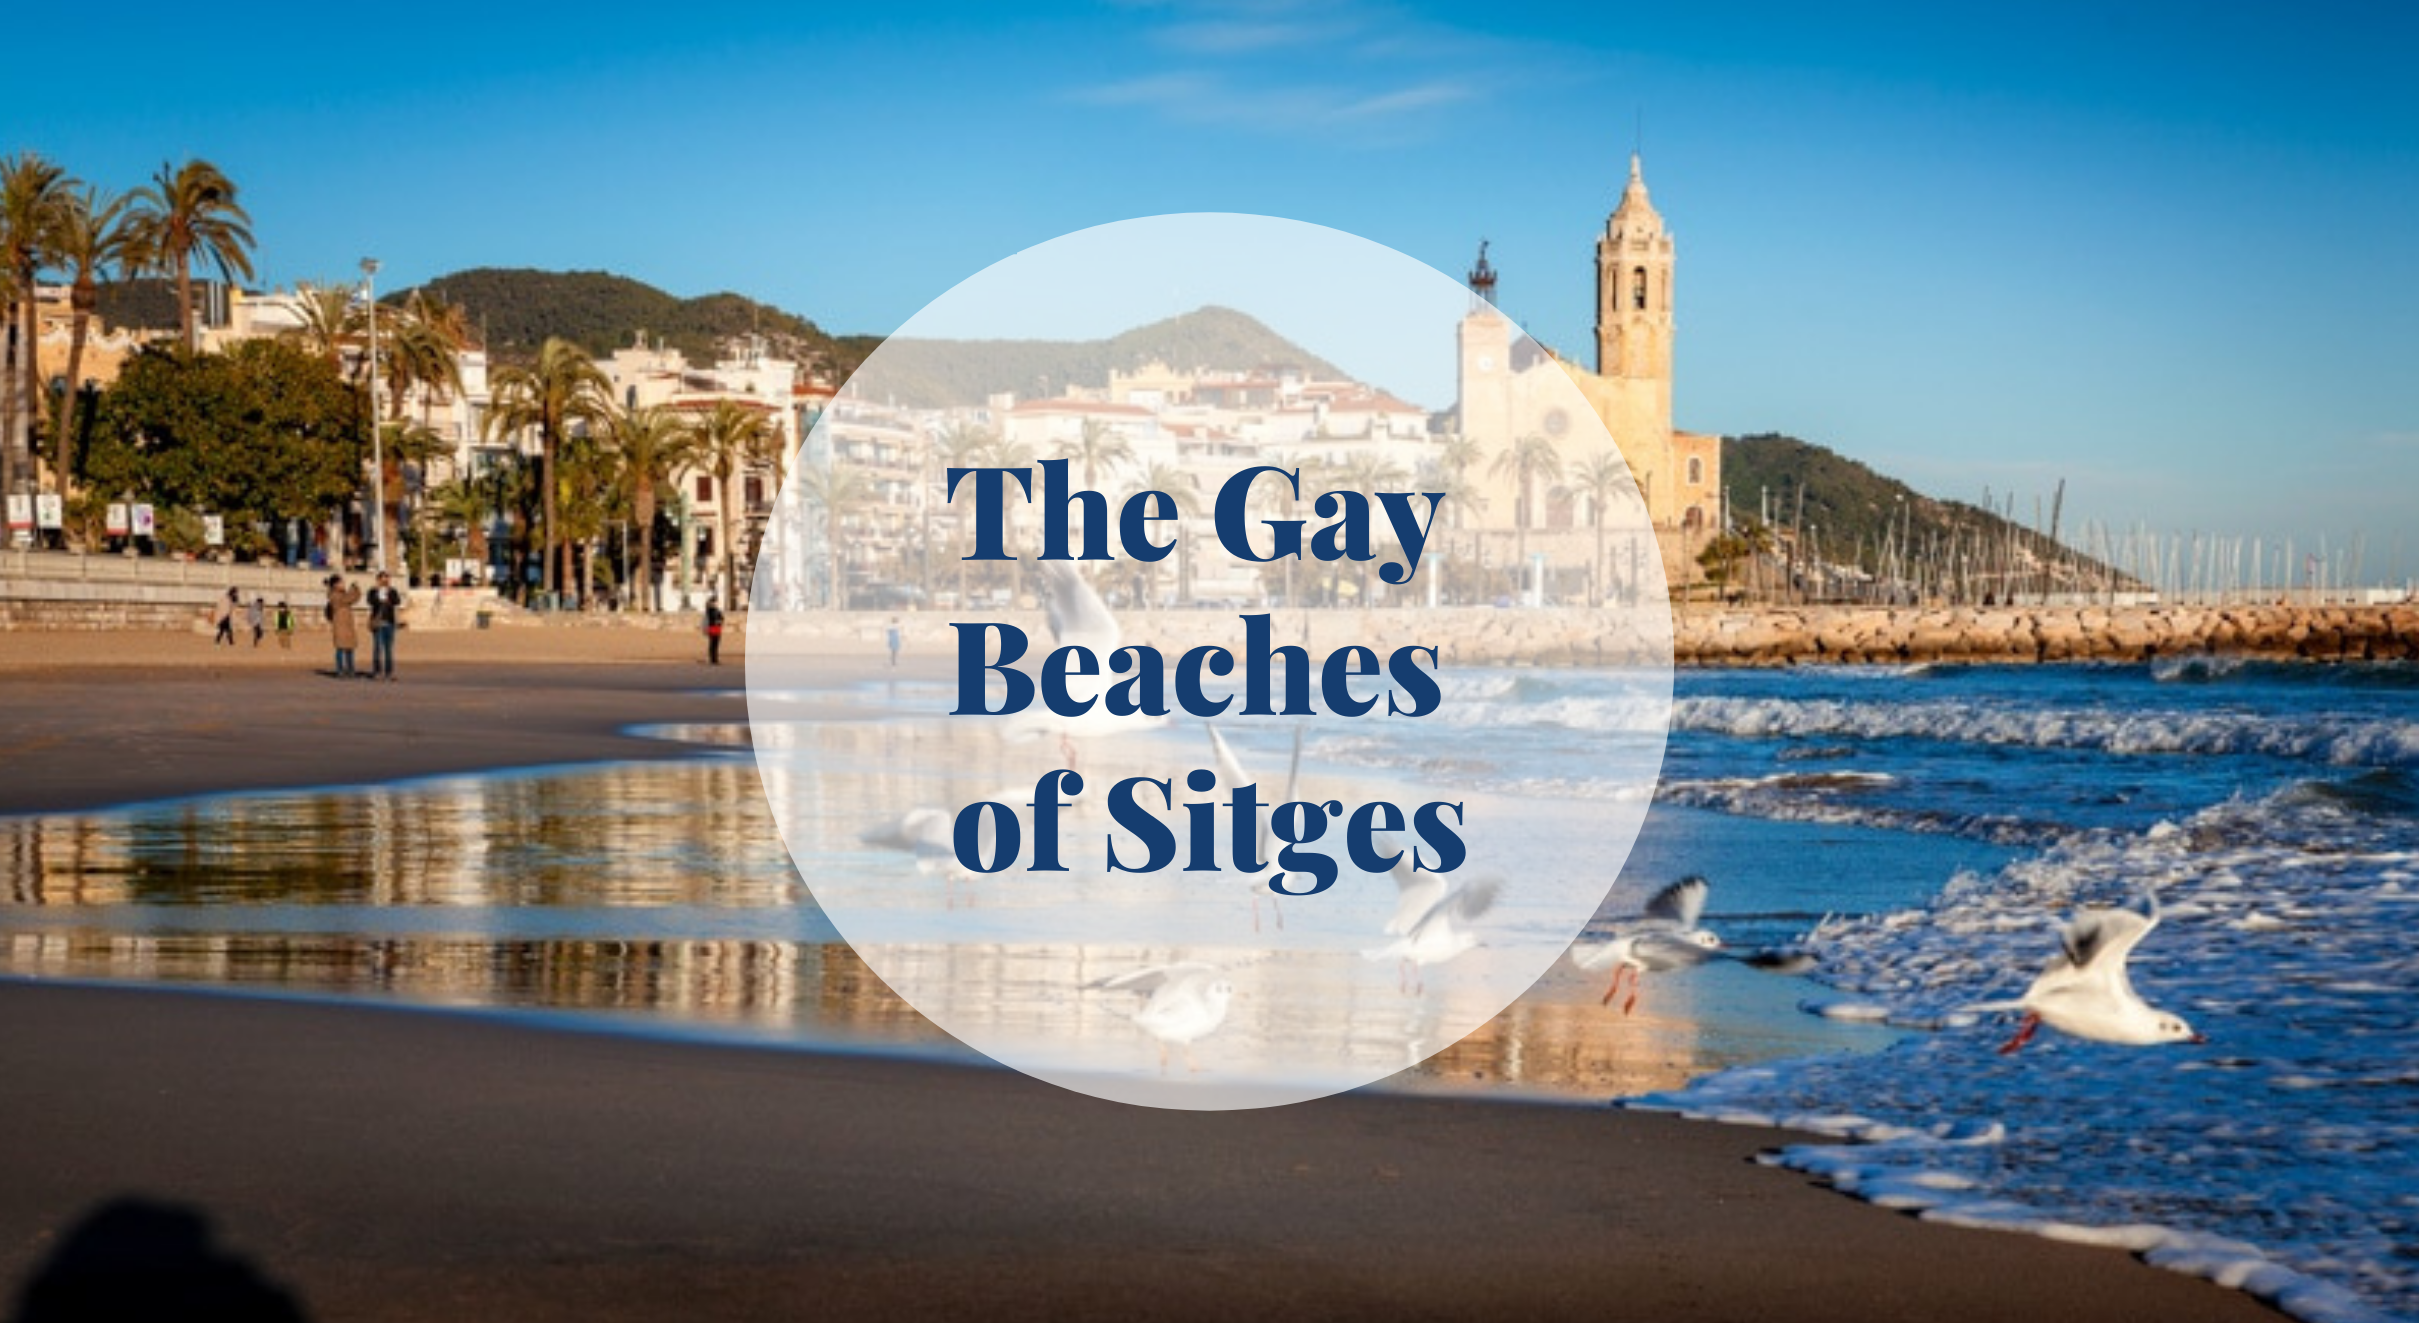 Lets discover the Gay Beaches of Sitges photo